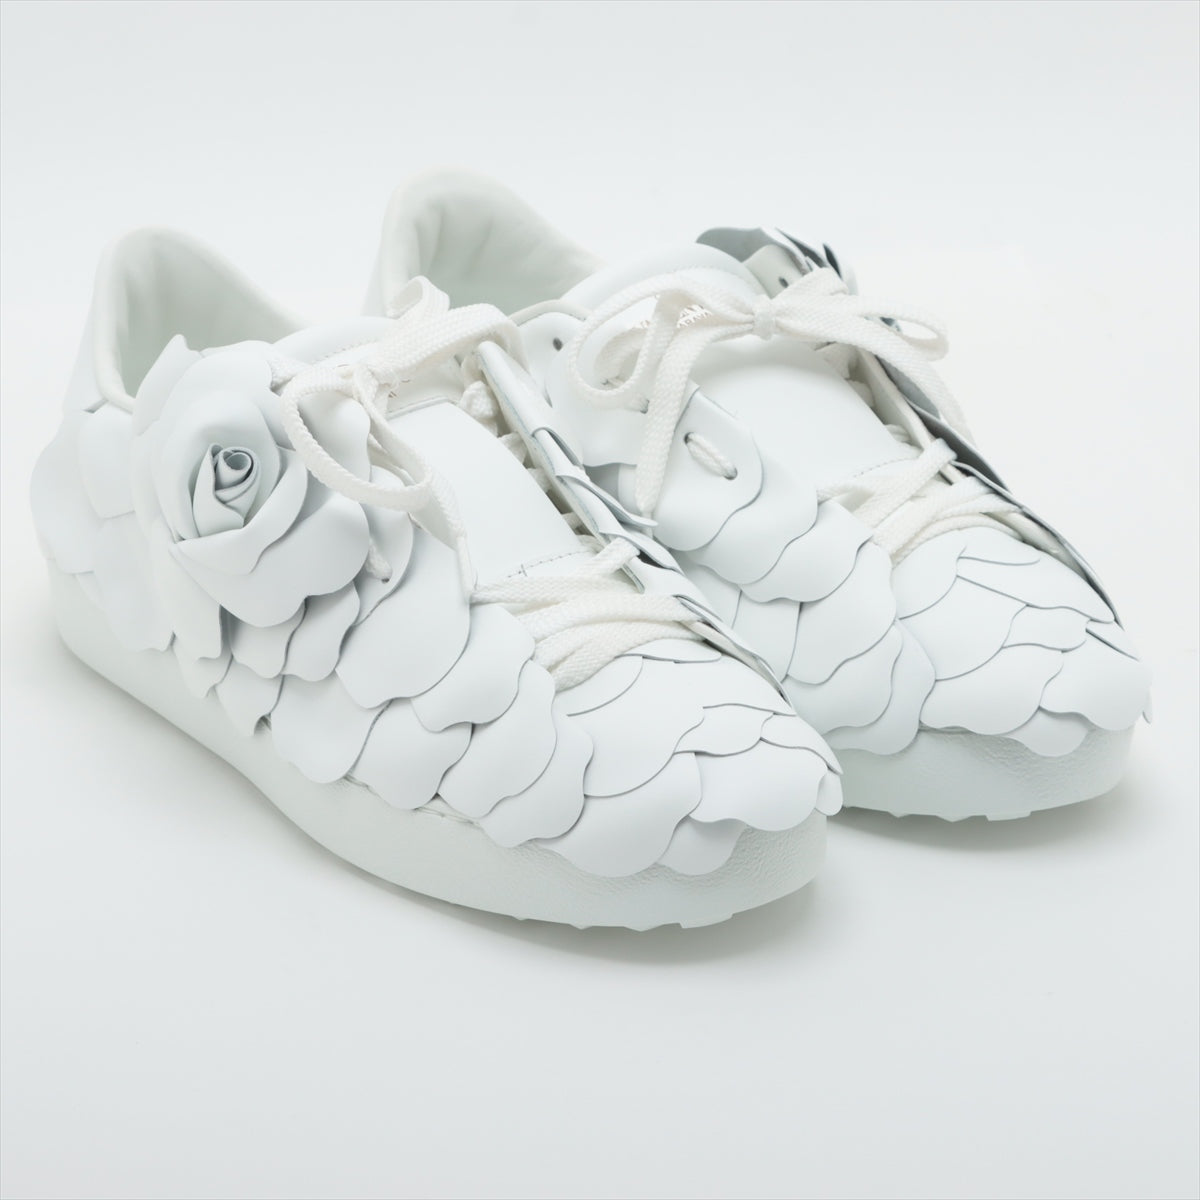 Valentino Garavani Leather Sneakers EU37 1/2 Ladies' White Atelier Rose edition box There is a bag